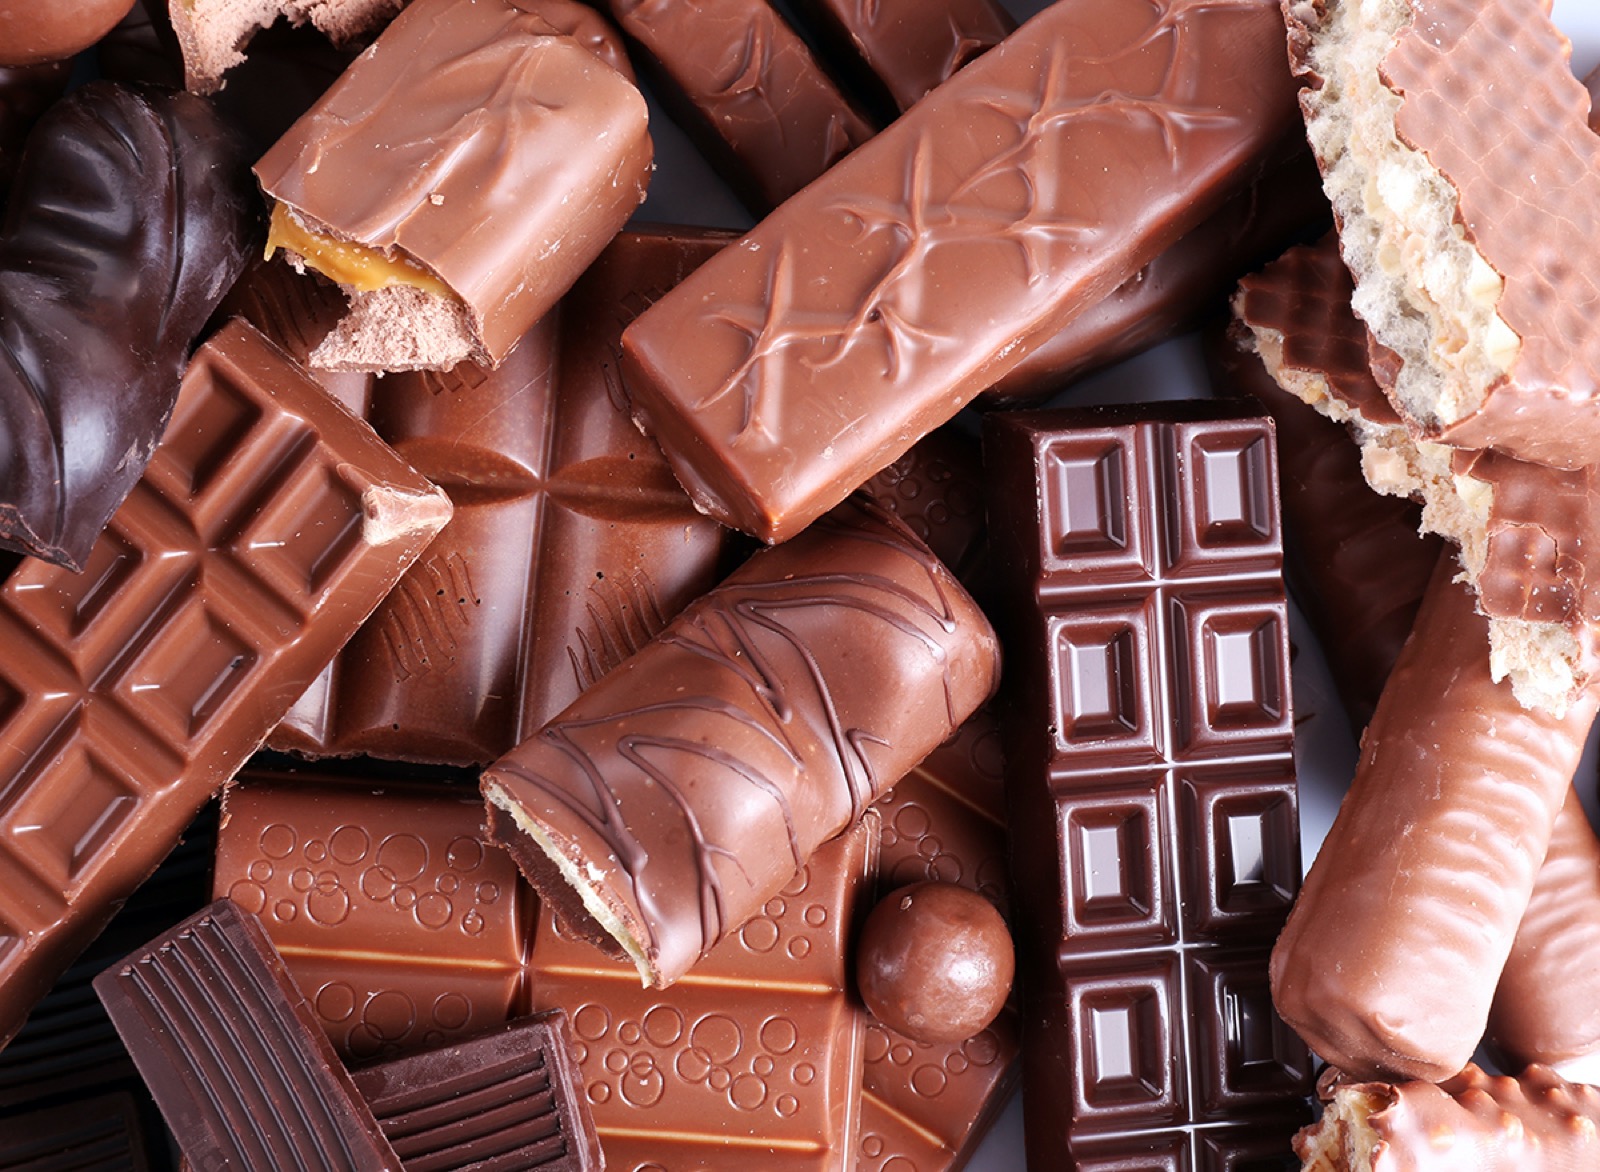 Does Your Real Age Match Your Taste Buds’ Age? Pick a Food for Each of These 16 Ingredients to Find Out Chocolate Candy Bars